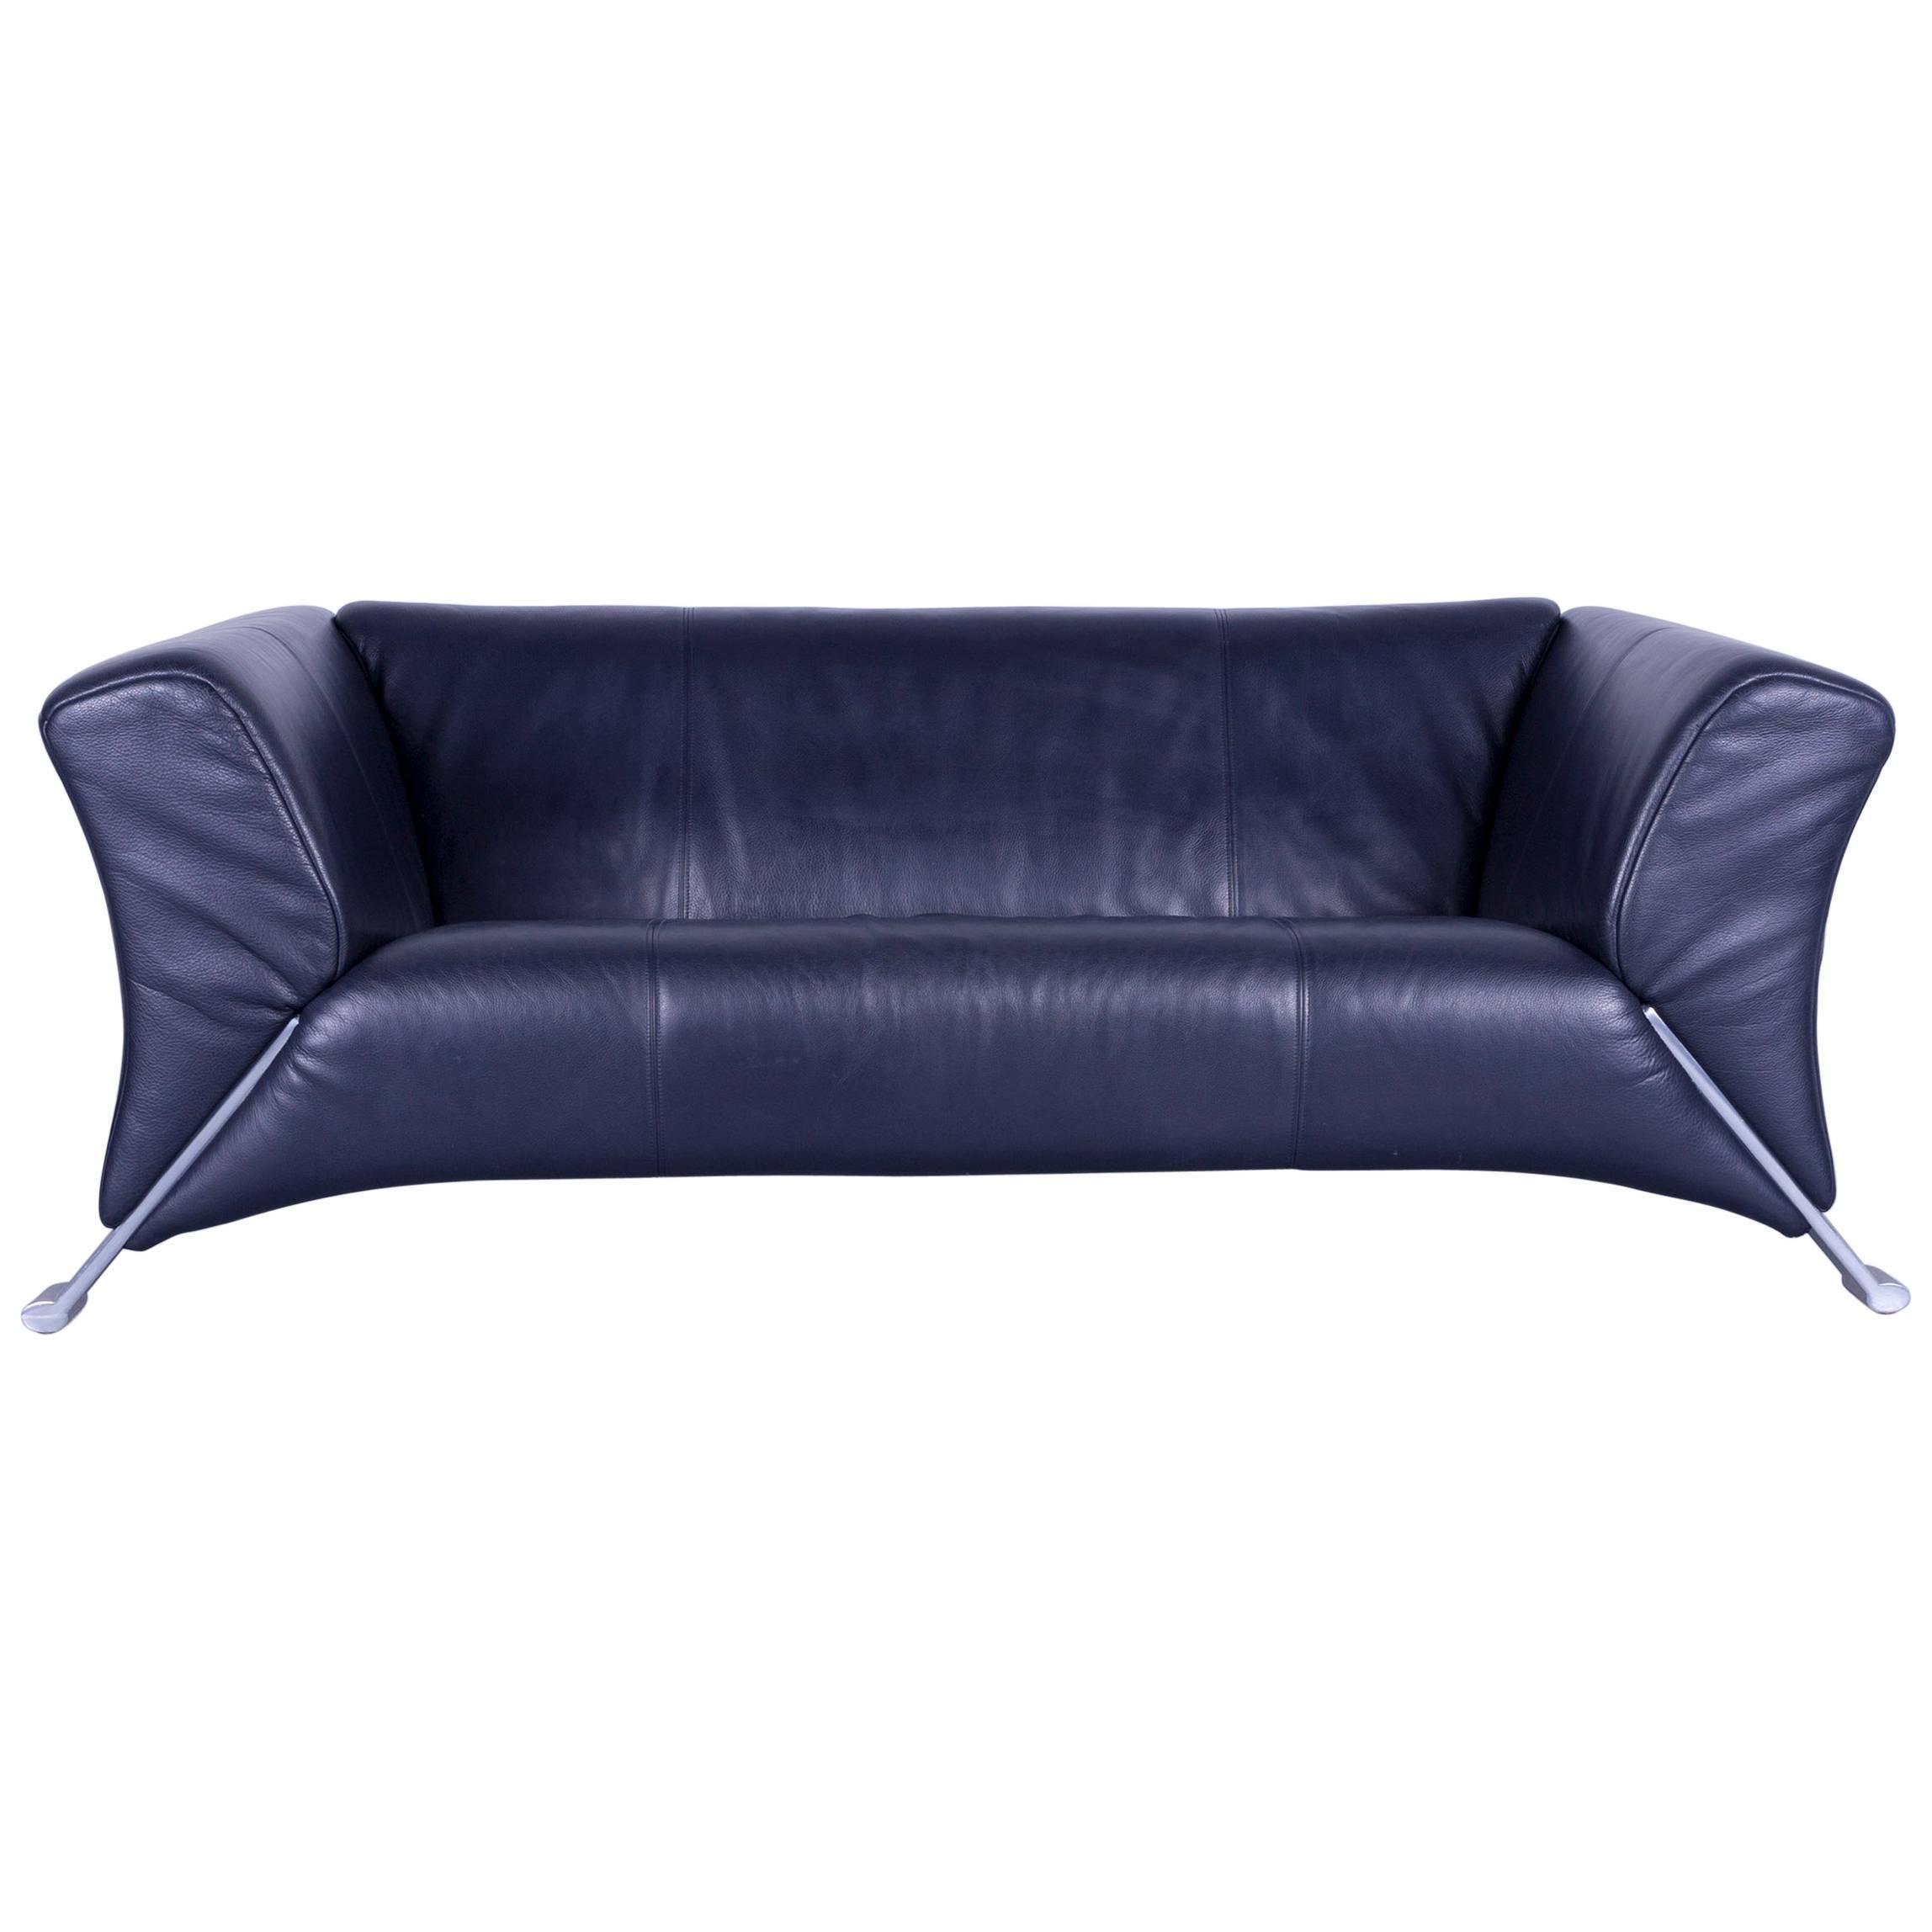 Rolf Benz 322 Designer Sofa Blue Two-Seat Leather Modern Couch Metal Feet For Sale